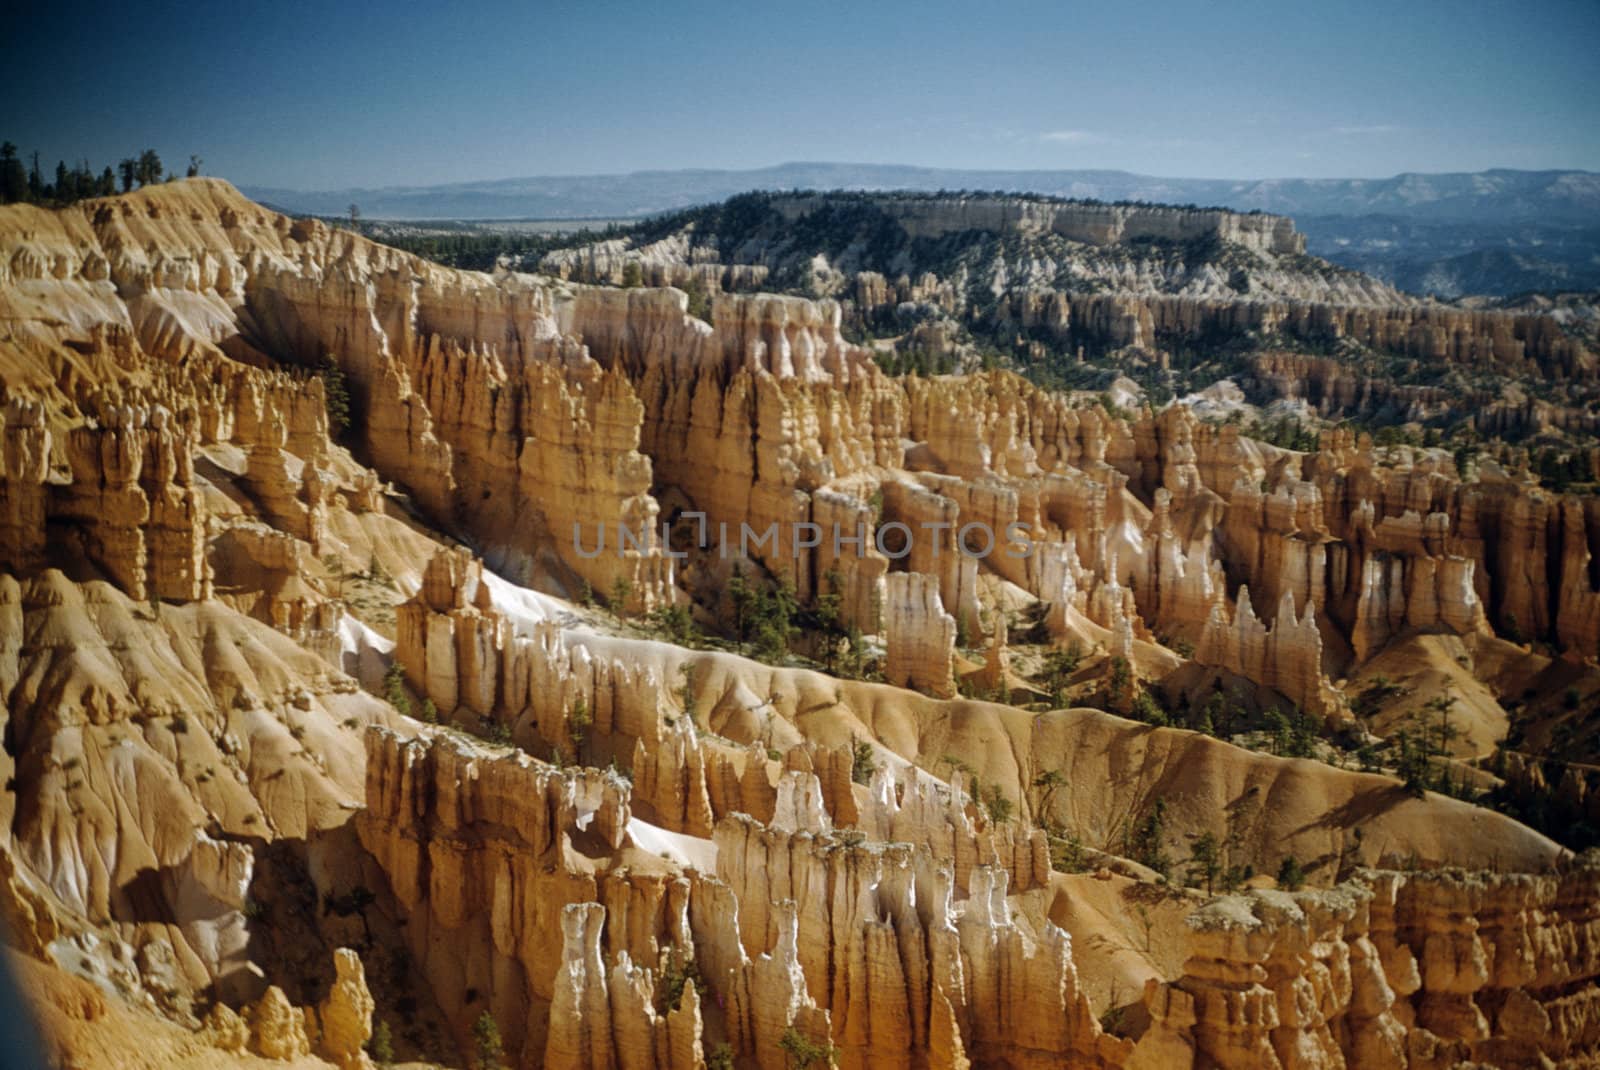 Sedimentary rock formations at Bryce Canyon National Park